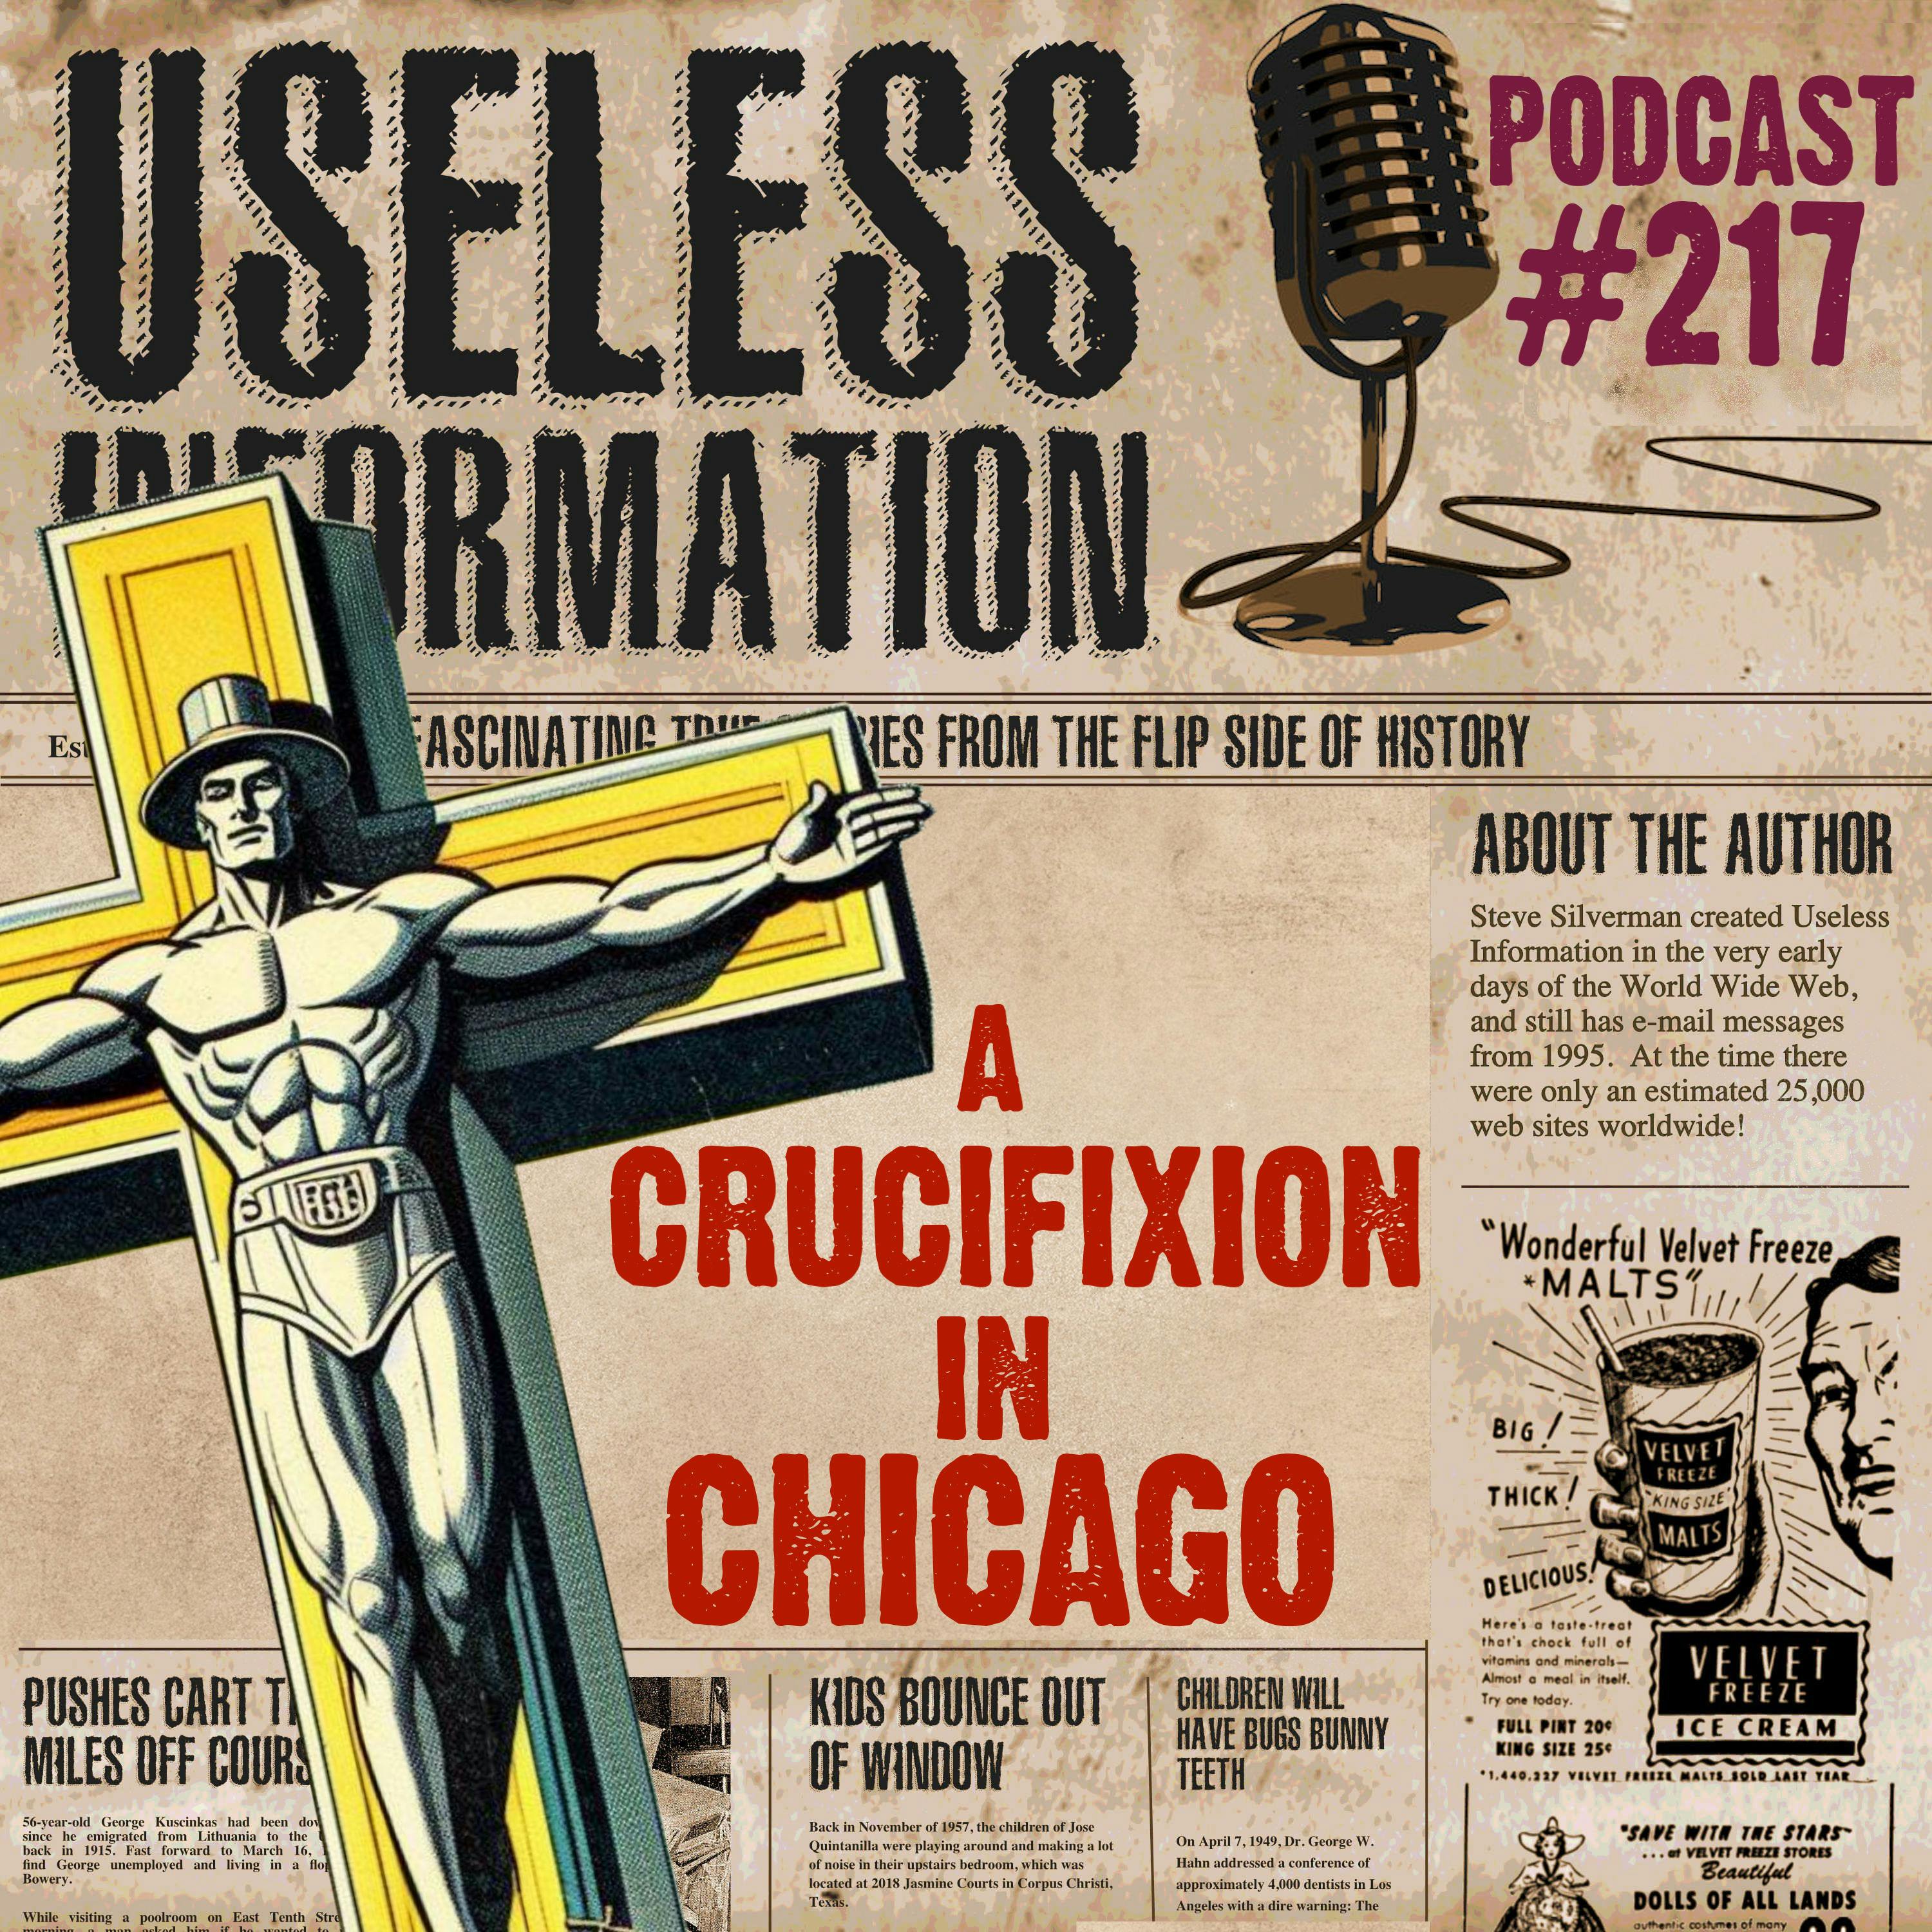 A Crucifixion in Chicago - UI Podcast #217